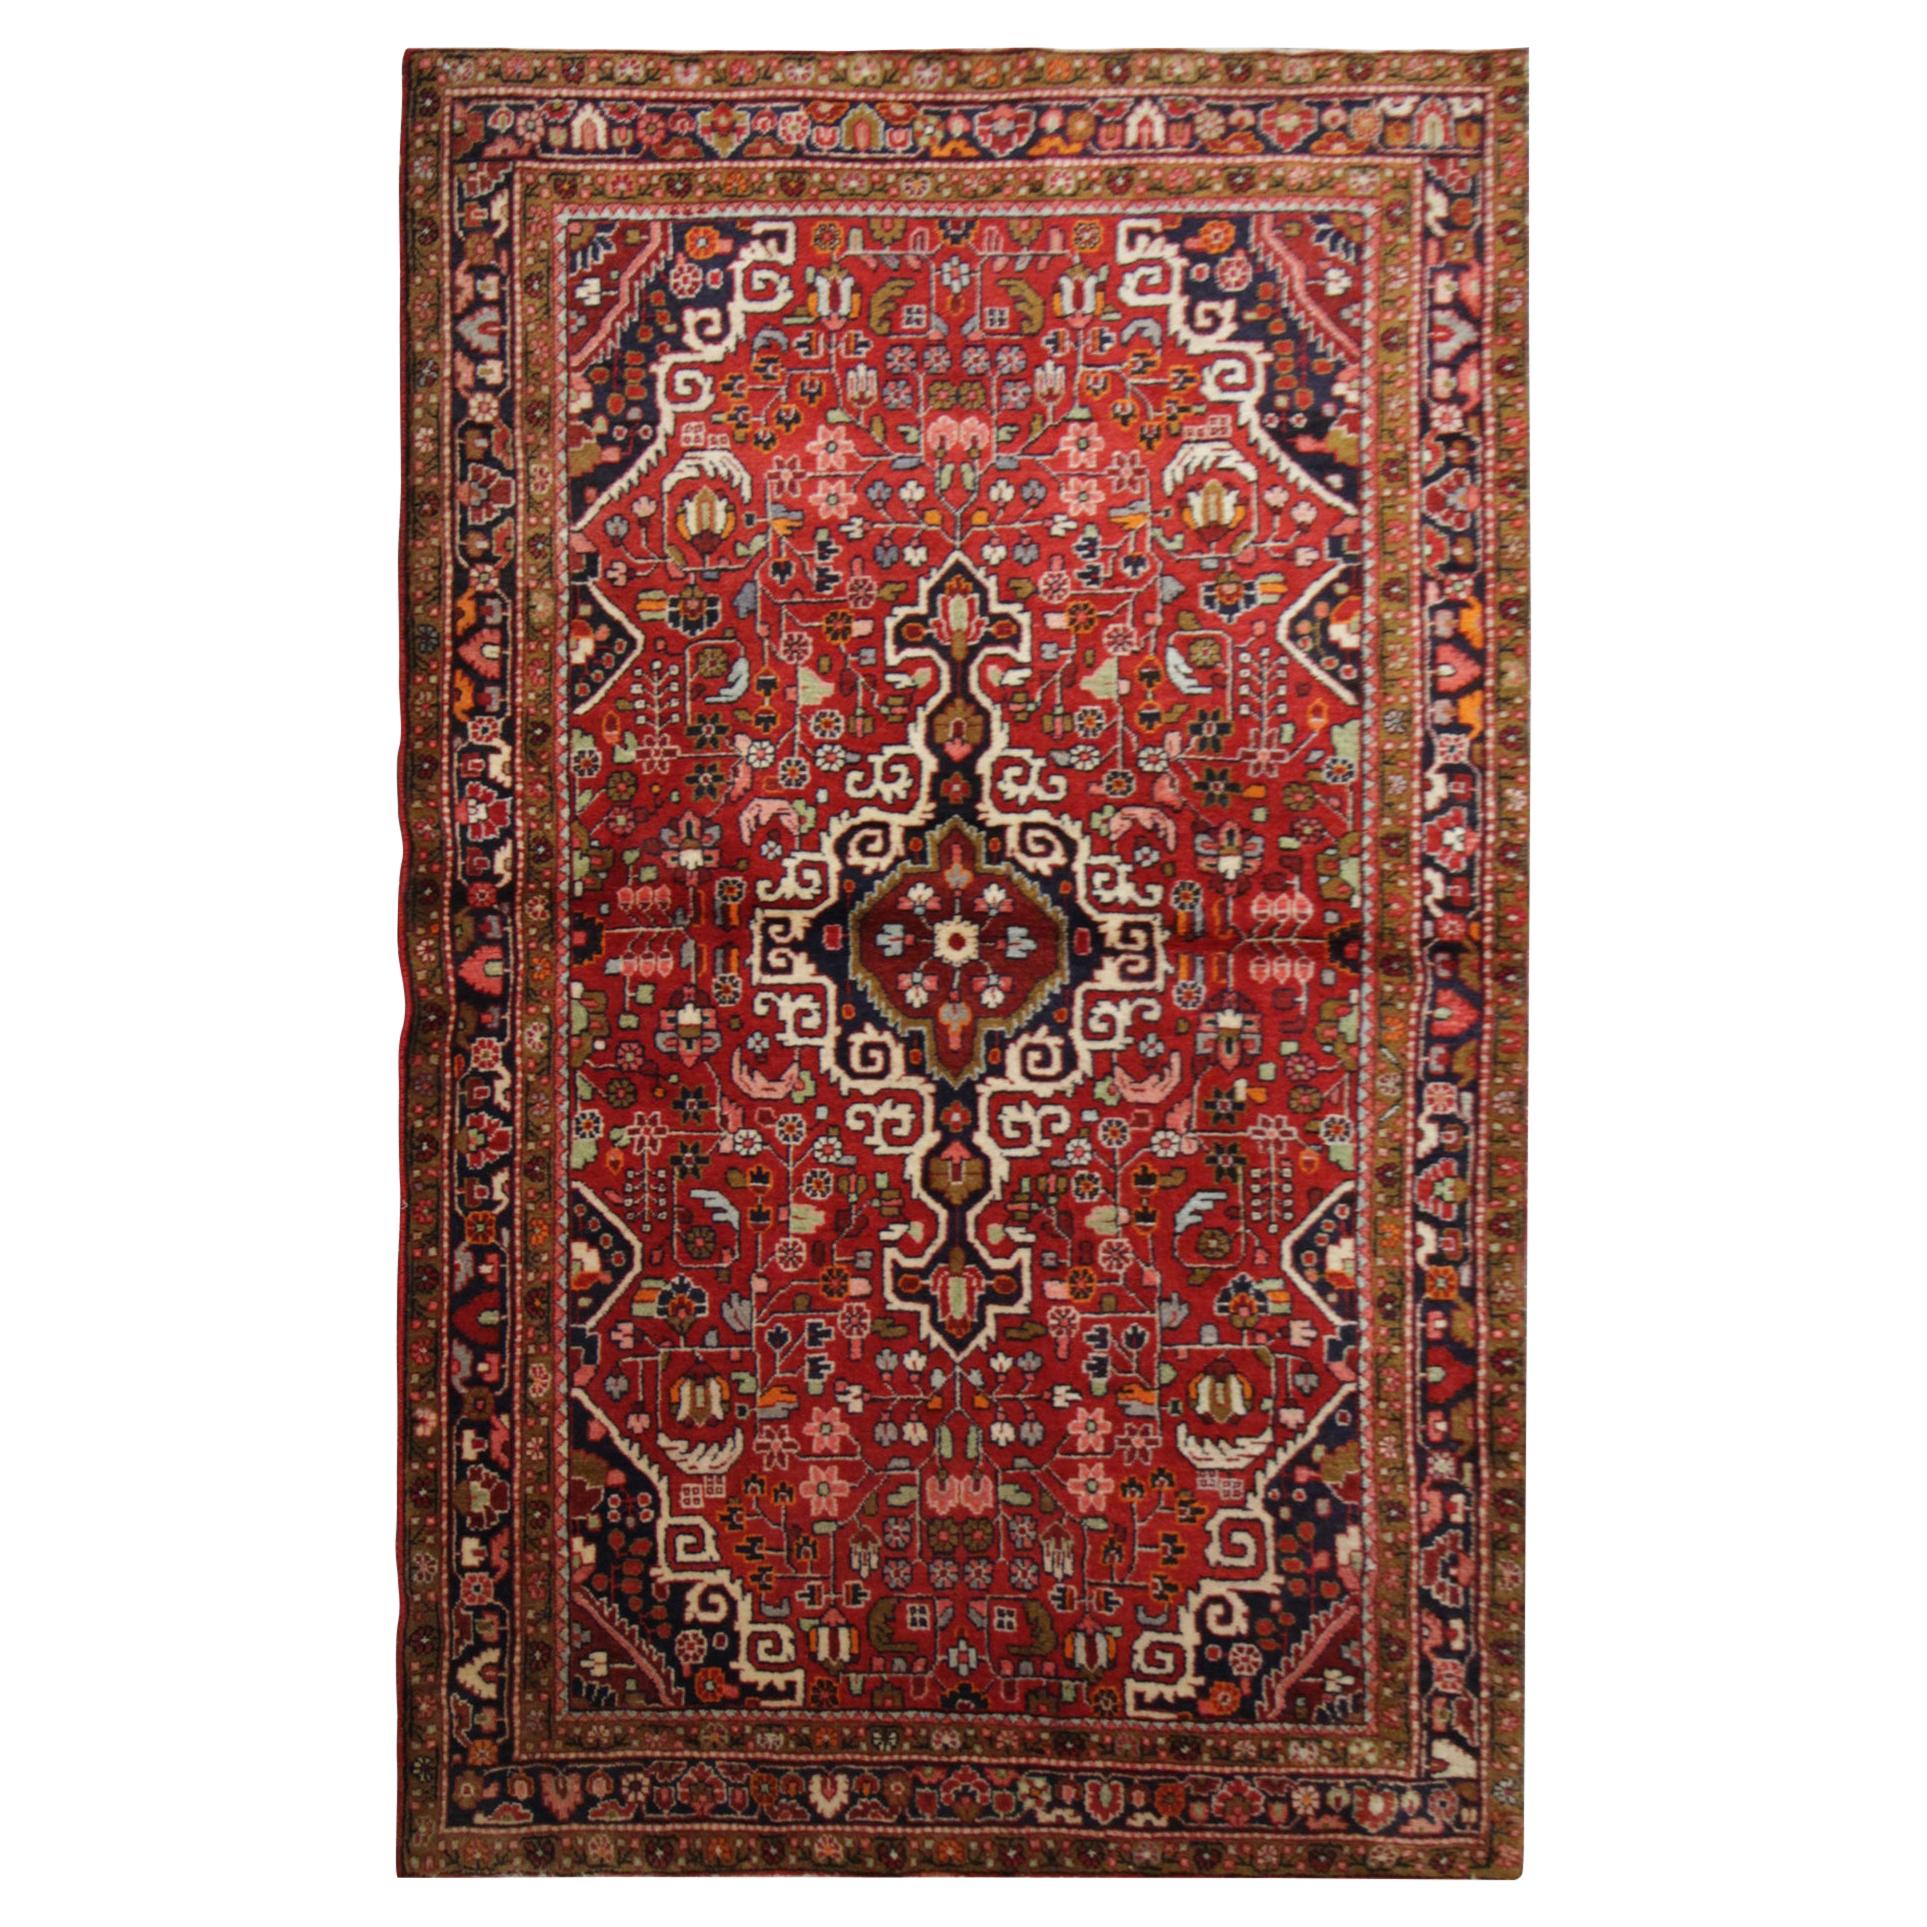 Handwoven Carpet Oriental Area Rug Traditional Tribal Red Wool Carpet 127 x 214 